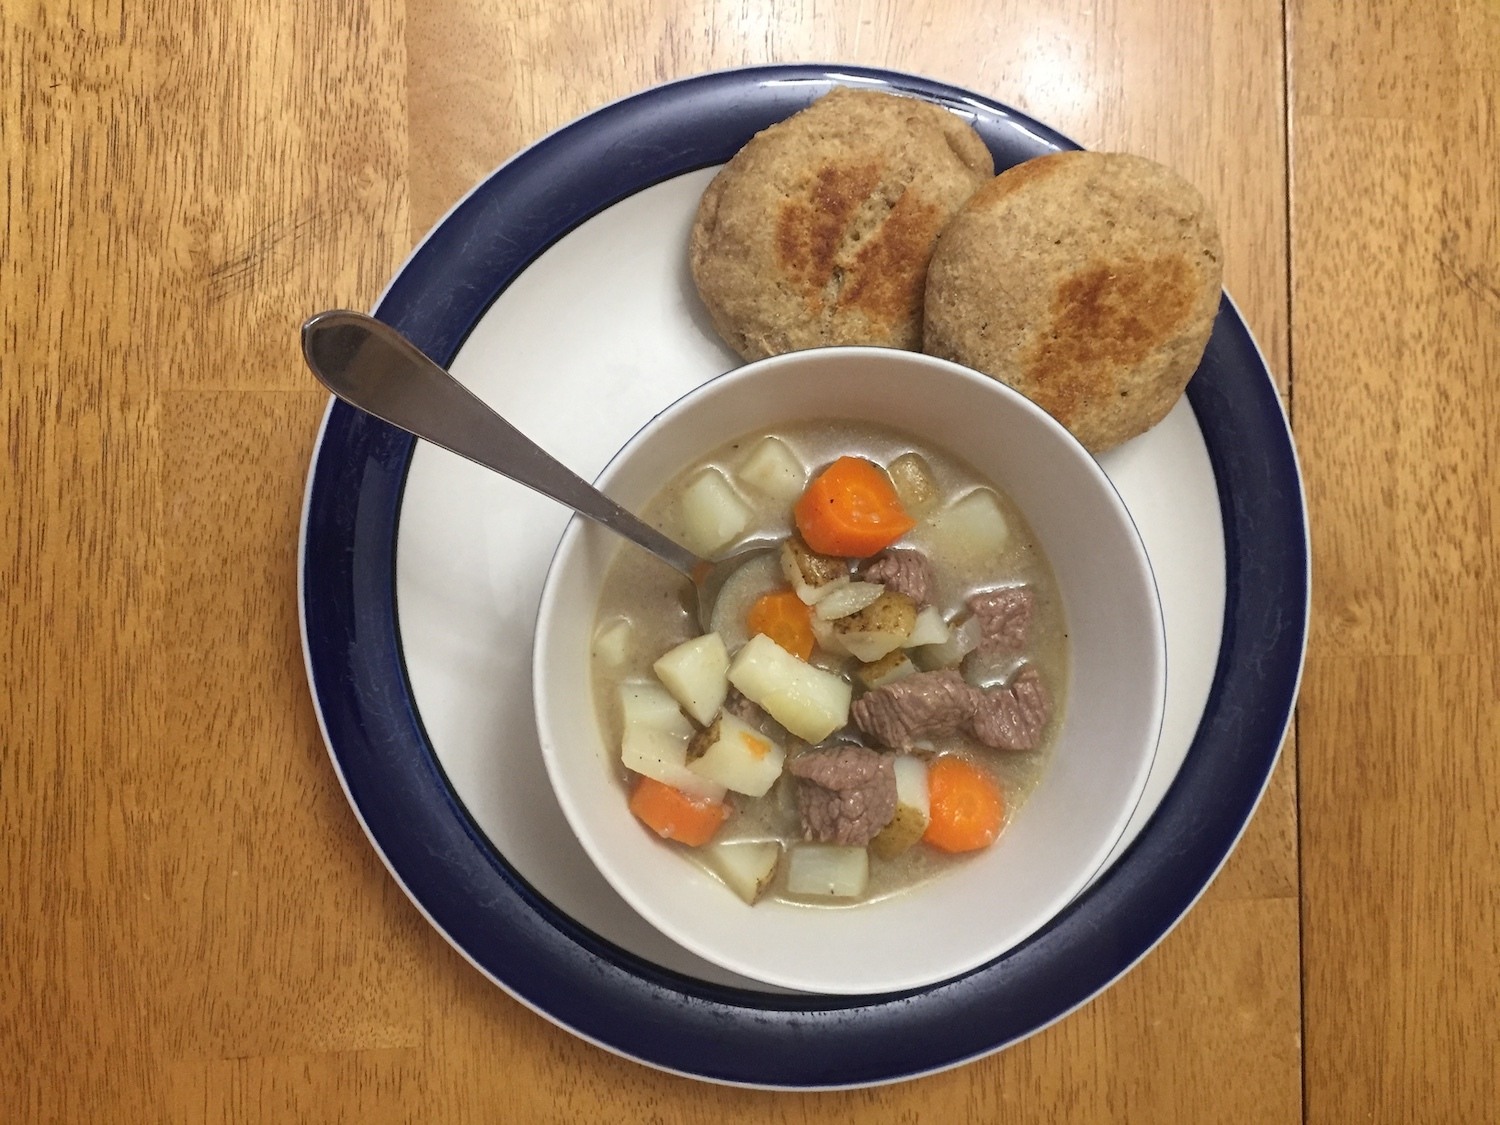 A bowl of meat stew with potatoes, carrots, and two biscuits. September 2020